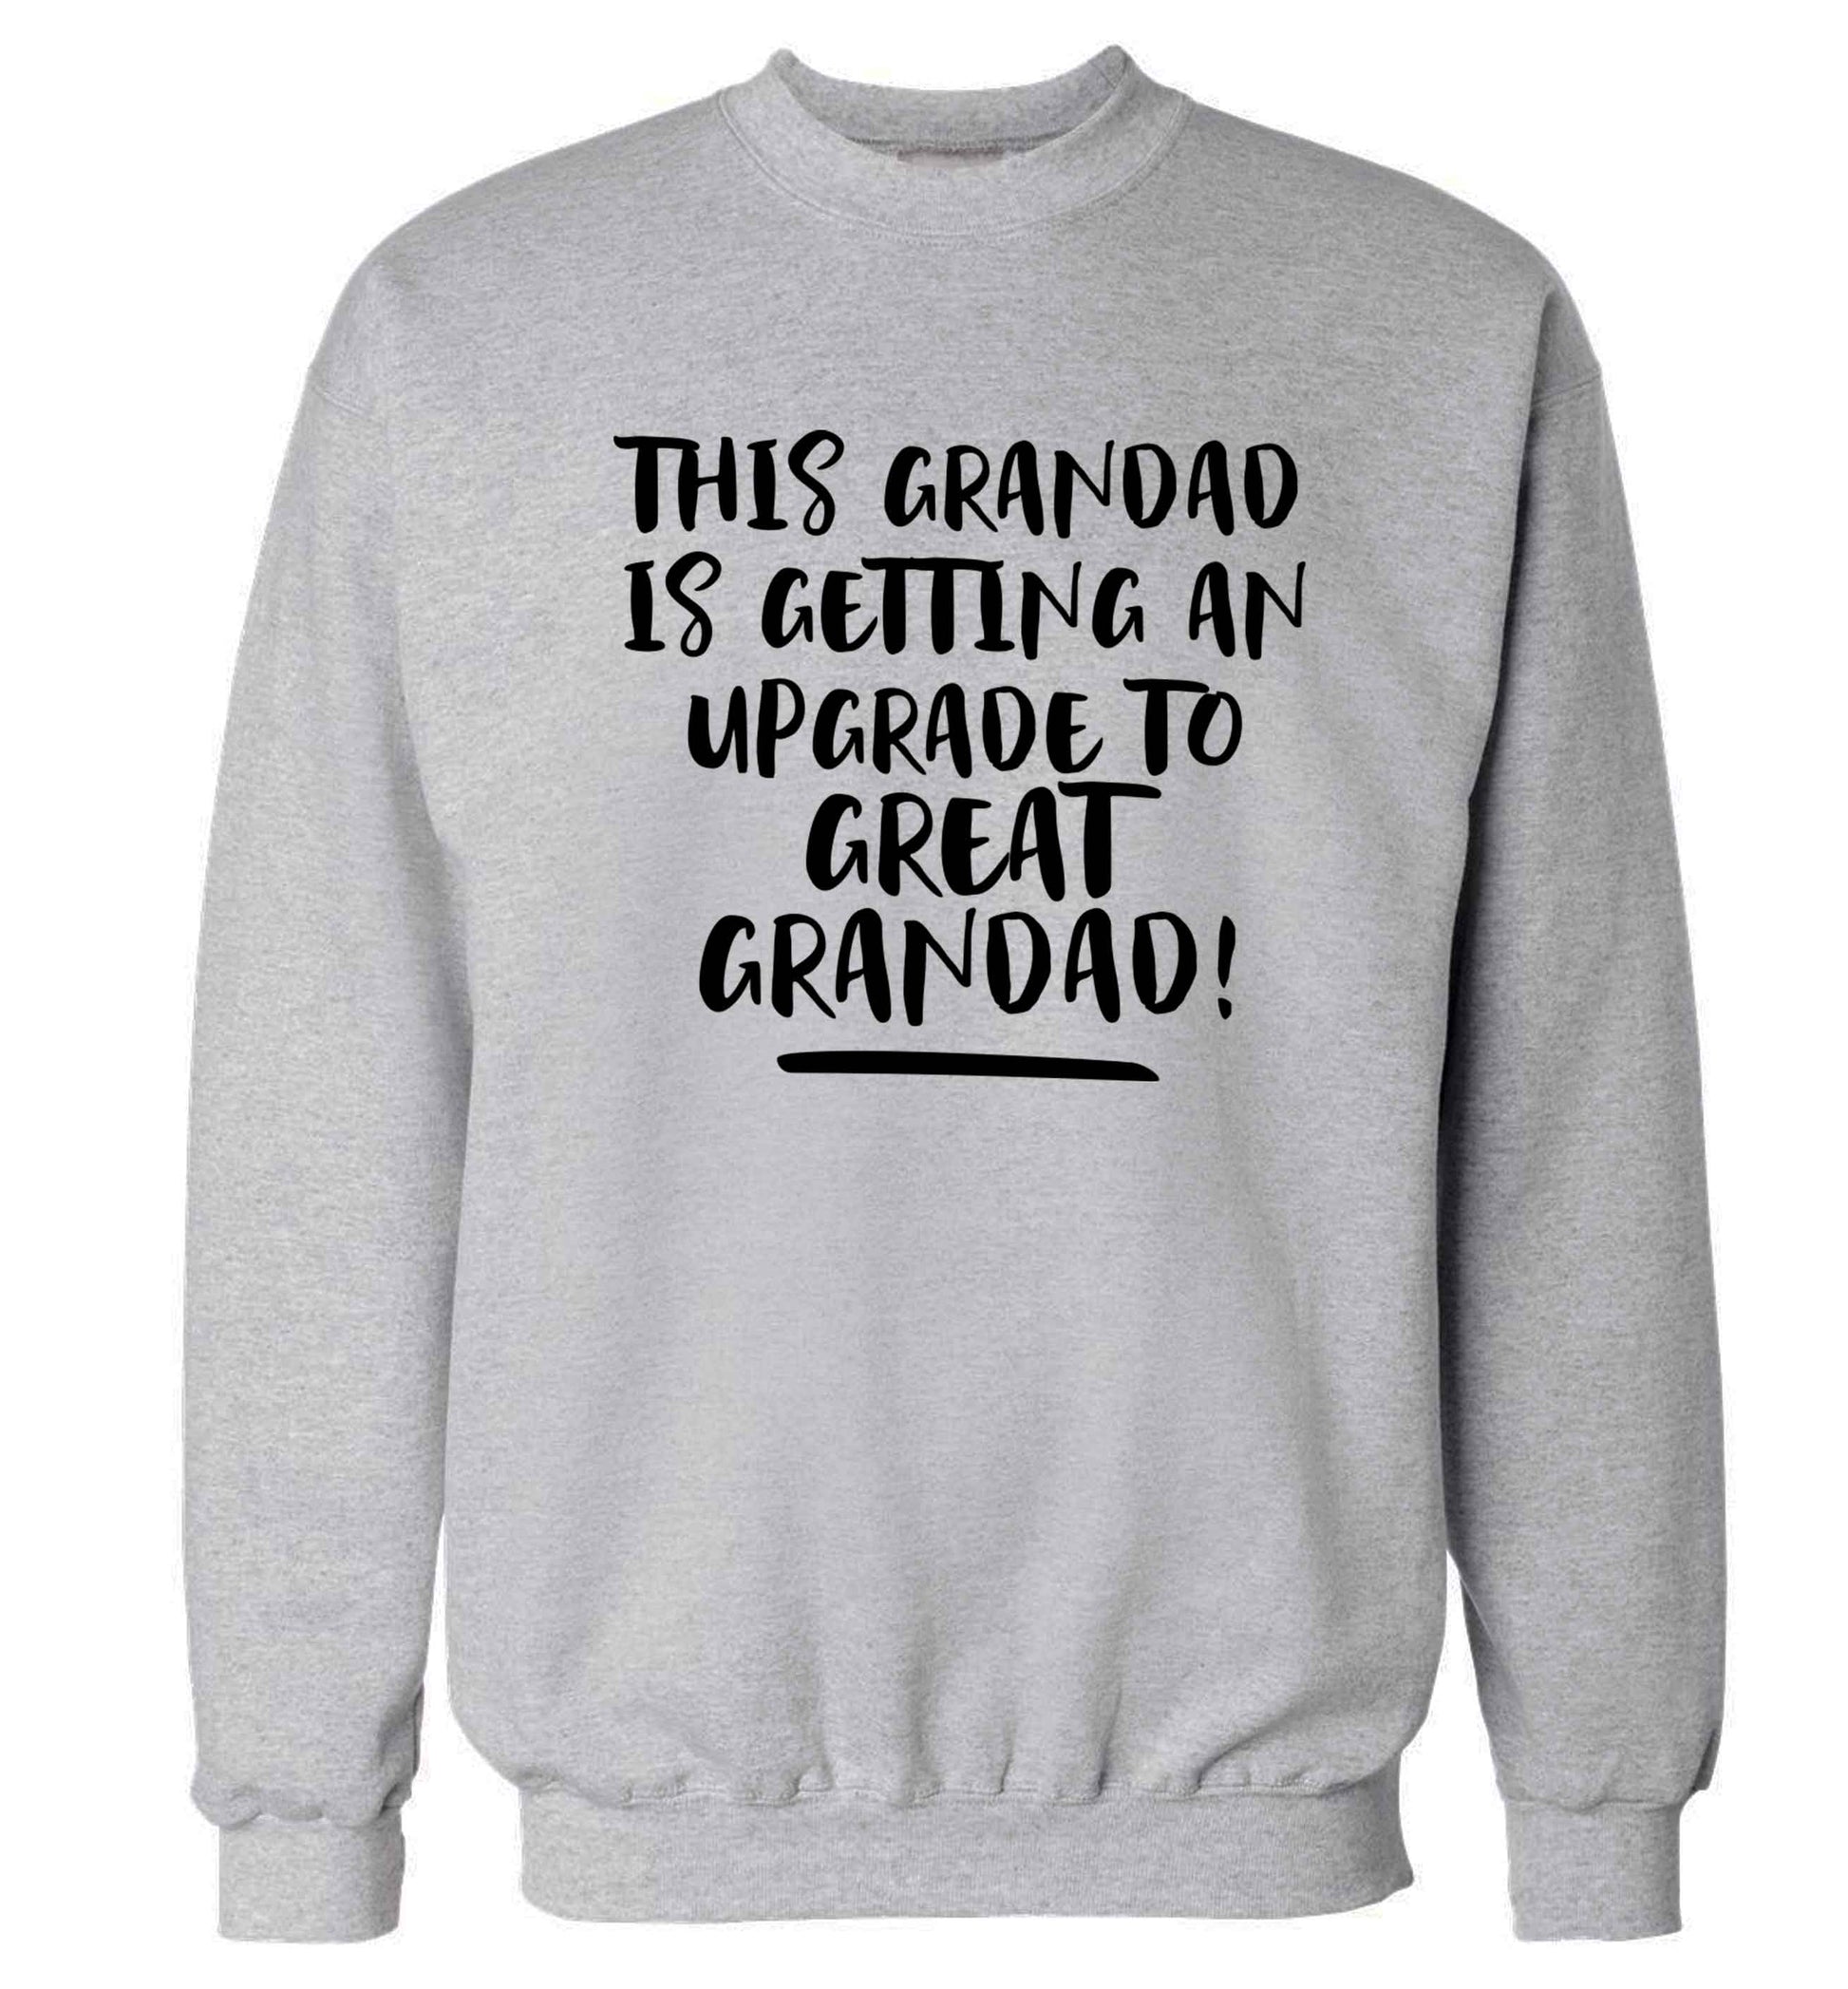 This grandad is getting an upgrade to great grandad! Adult's unisex grey Sweater 2XL